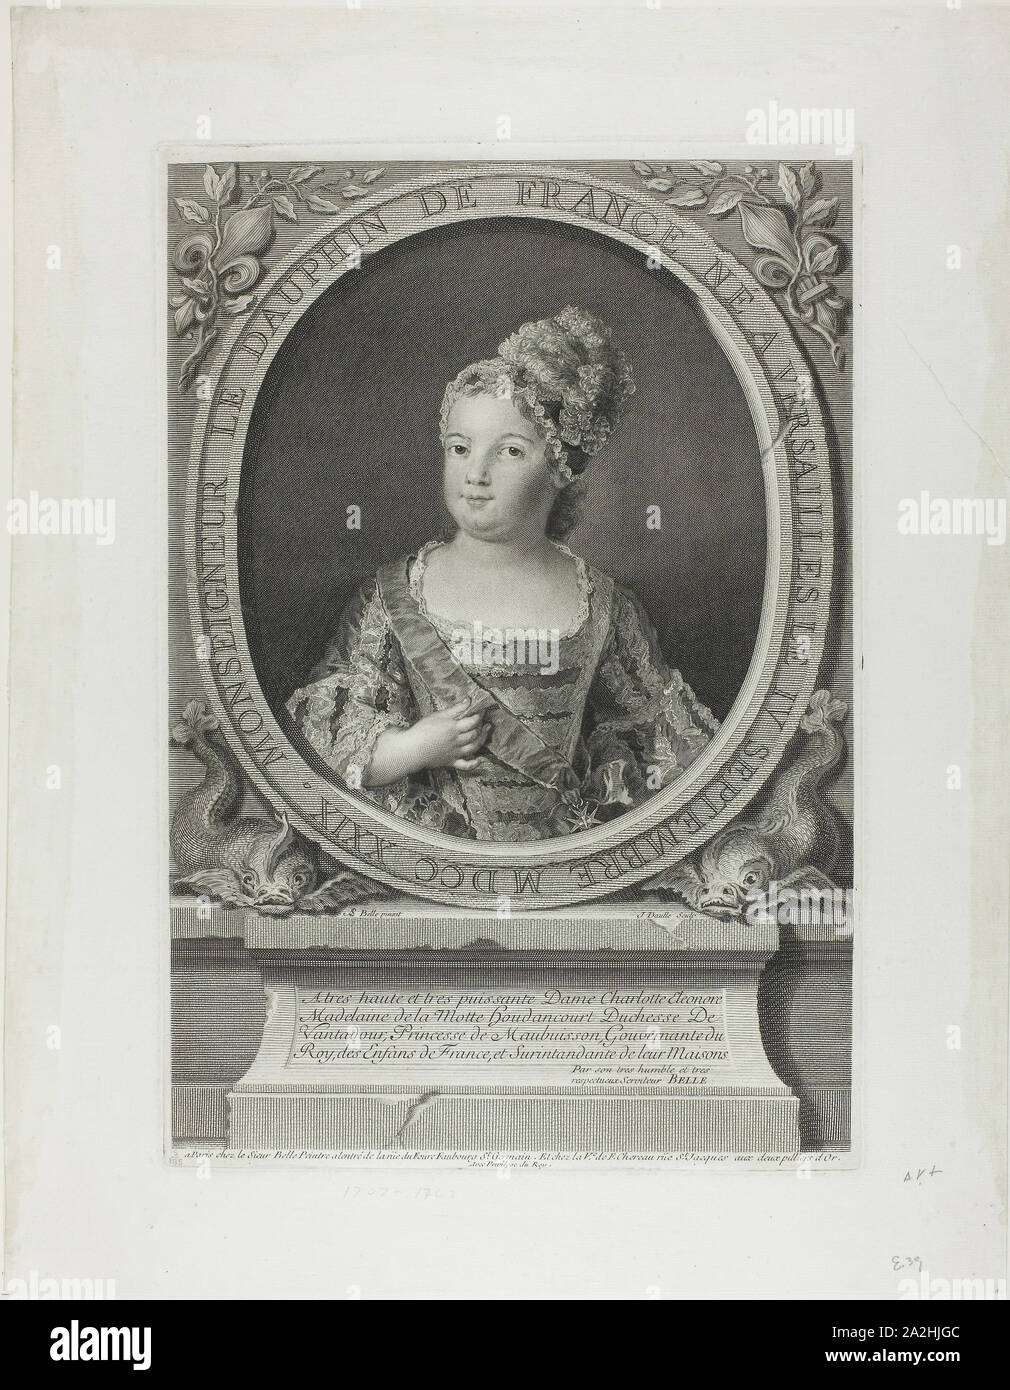 Monseigneur the Dauphin of France, 1730/33, Jean Daullé (French, 1703-1763), after Alexis-Simon Belle (French, 1674-1734), France, Engraving on ivory laid paper, 393 × 272 mm (image), 407 × 280 mm (plate), 515 × 399 mm (sheet Stock Photo